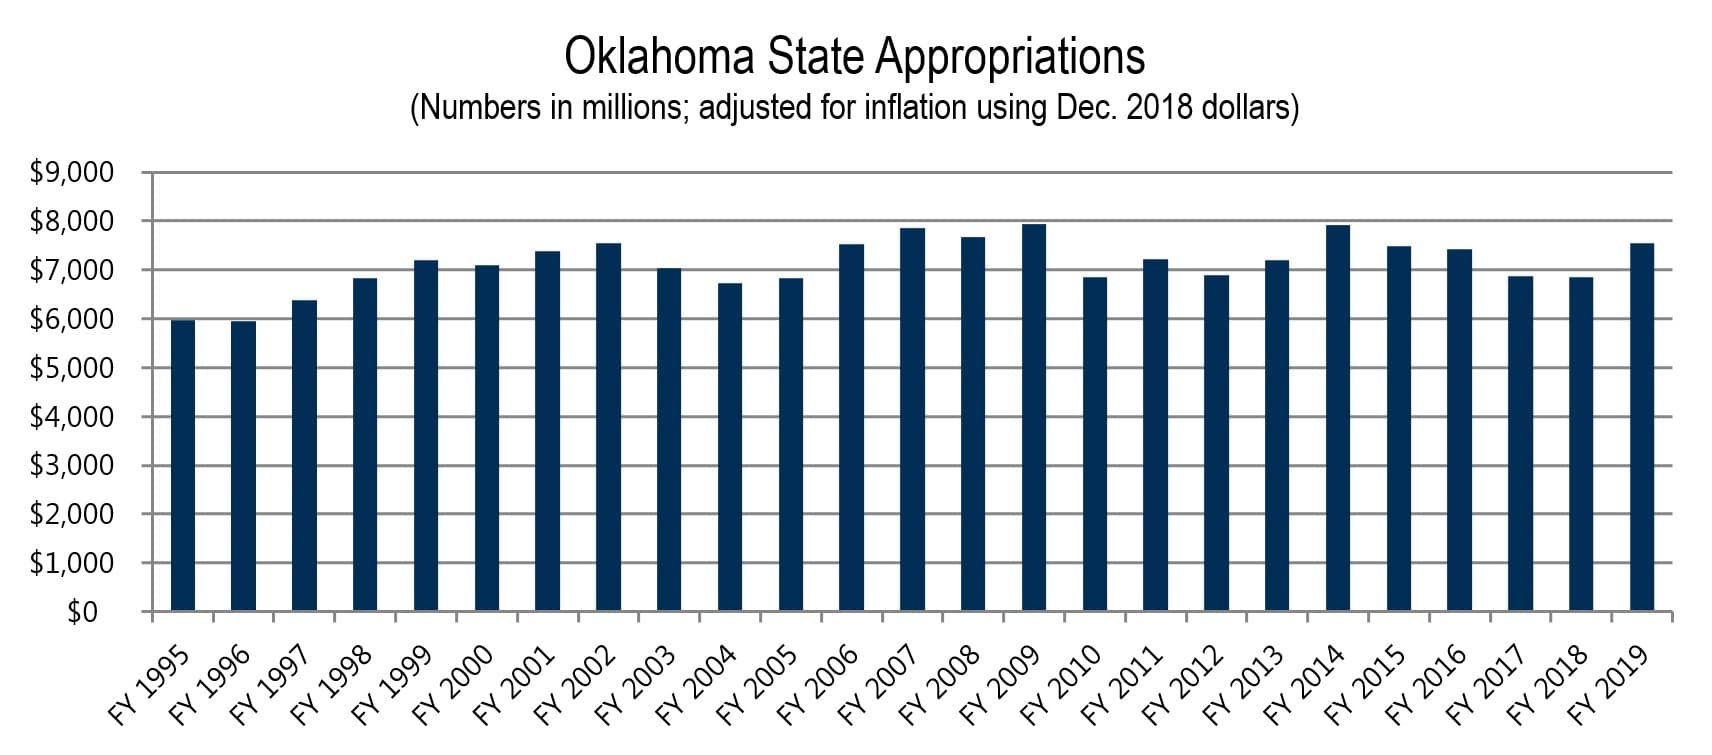 Oklahoma State Appropriations